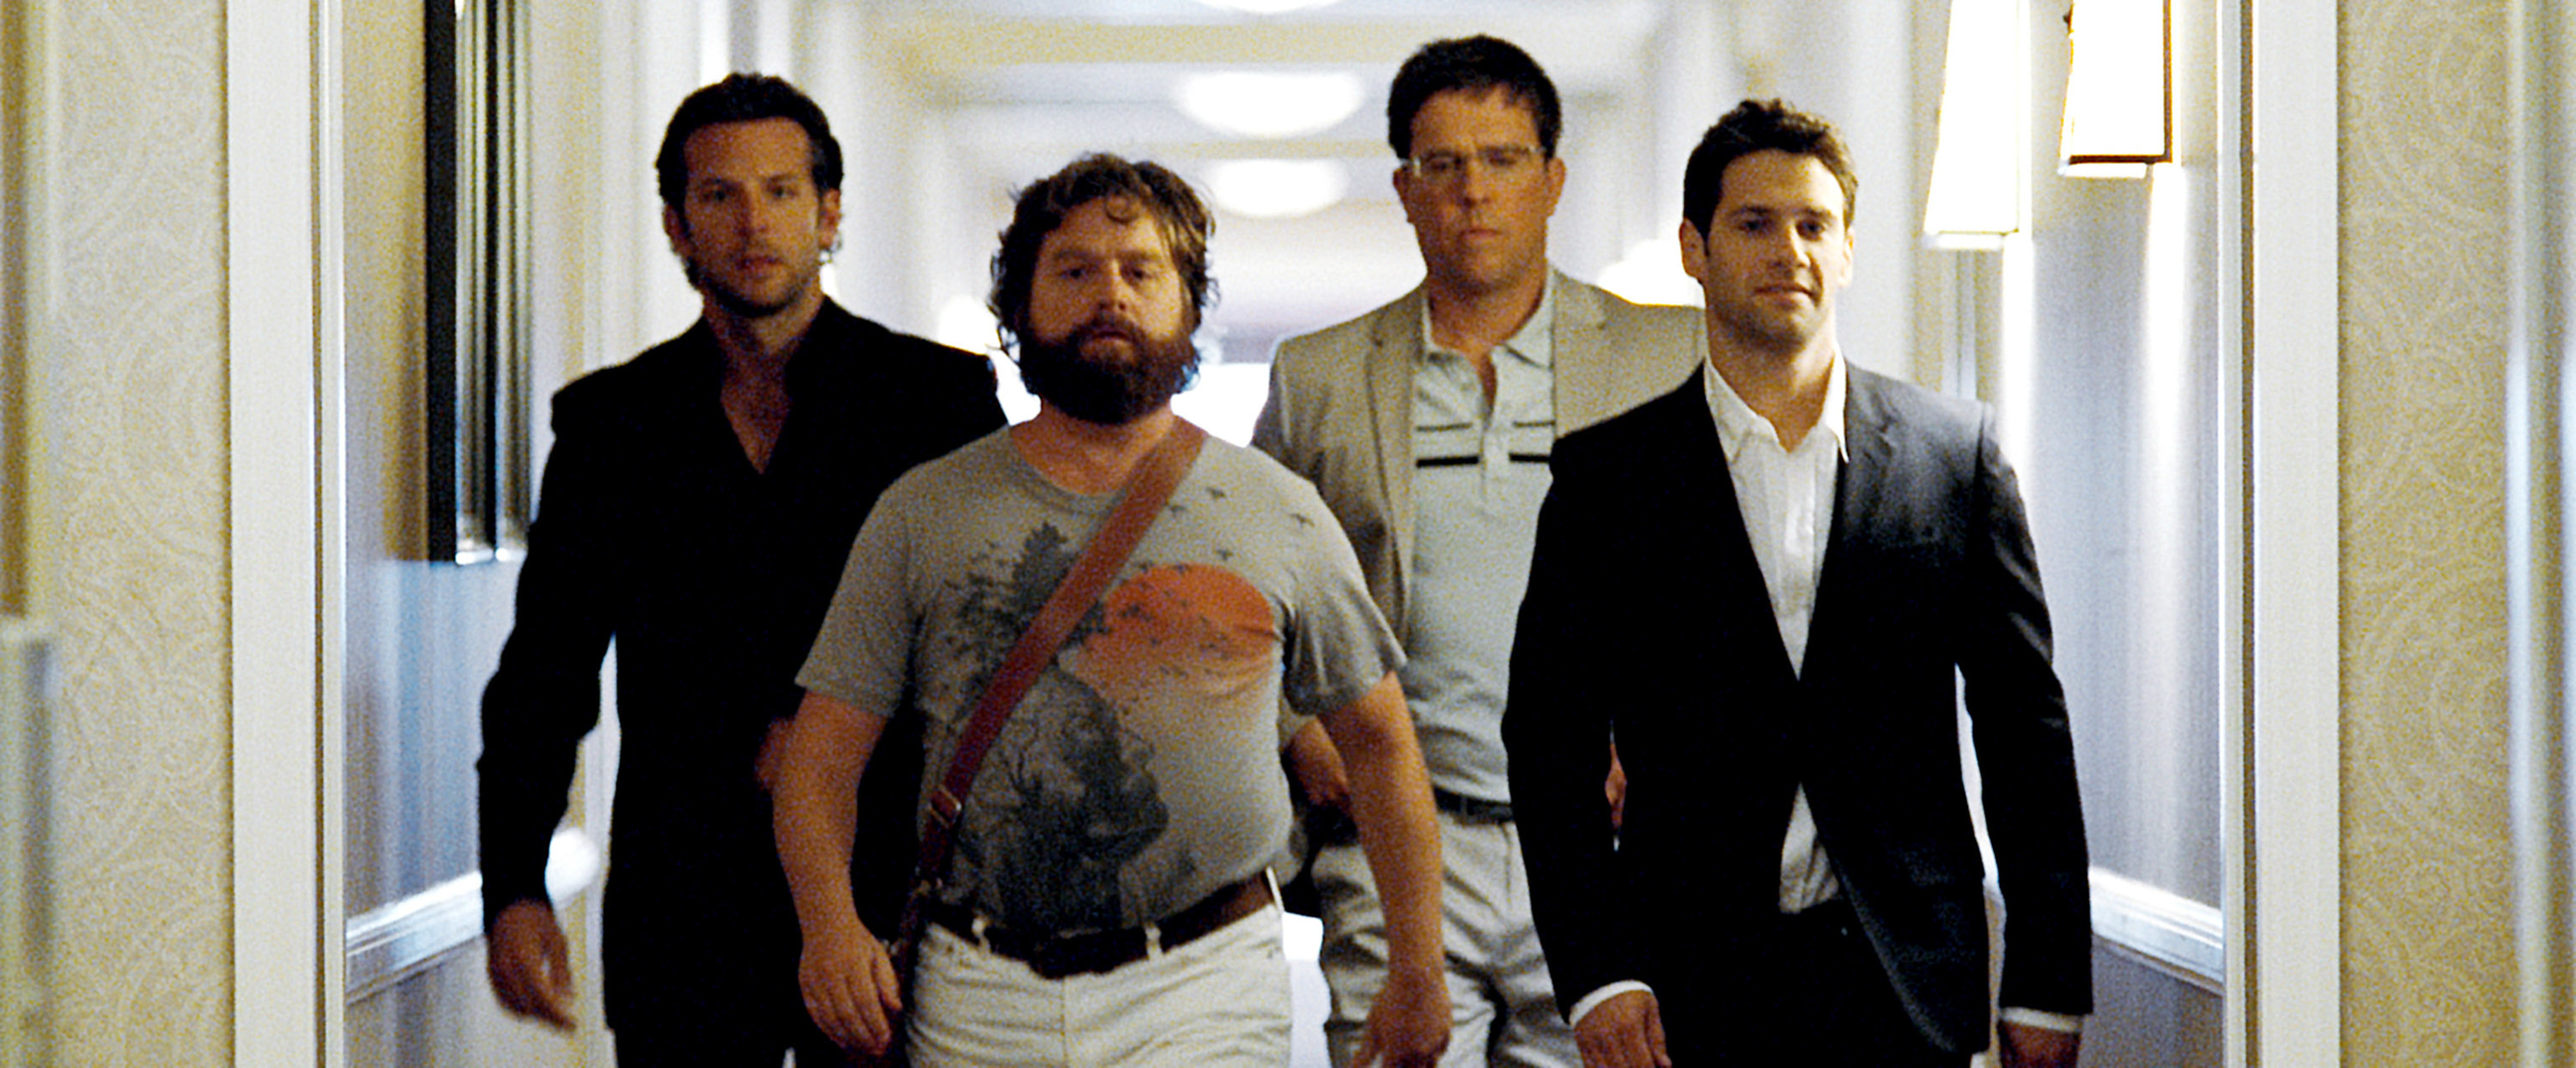 The cast of The Hangover walk down a hallway